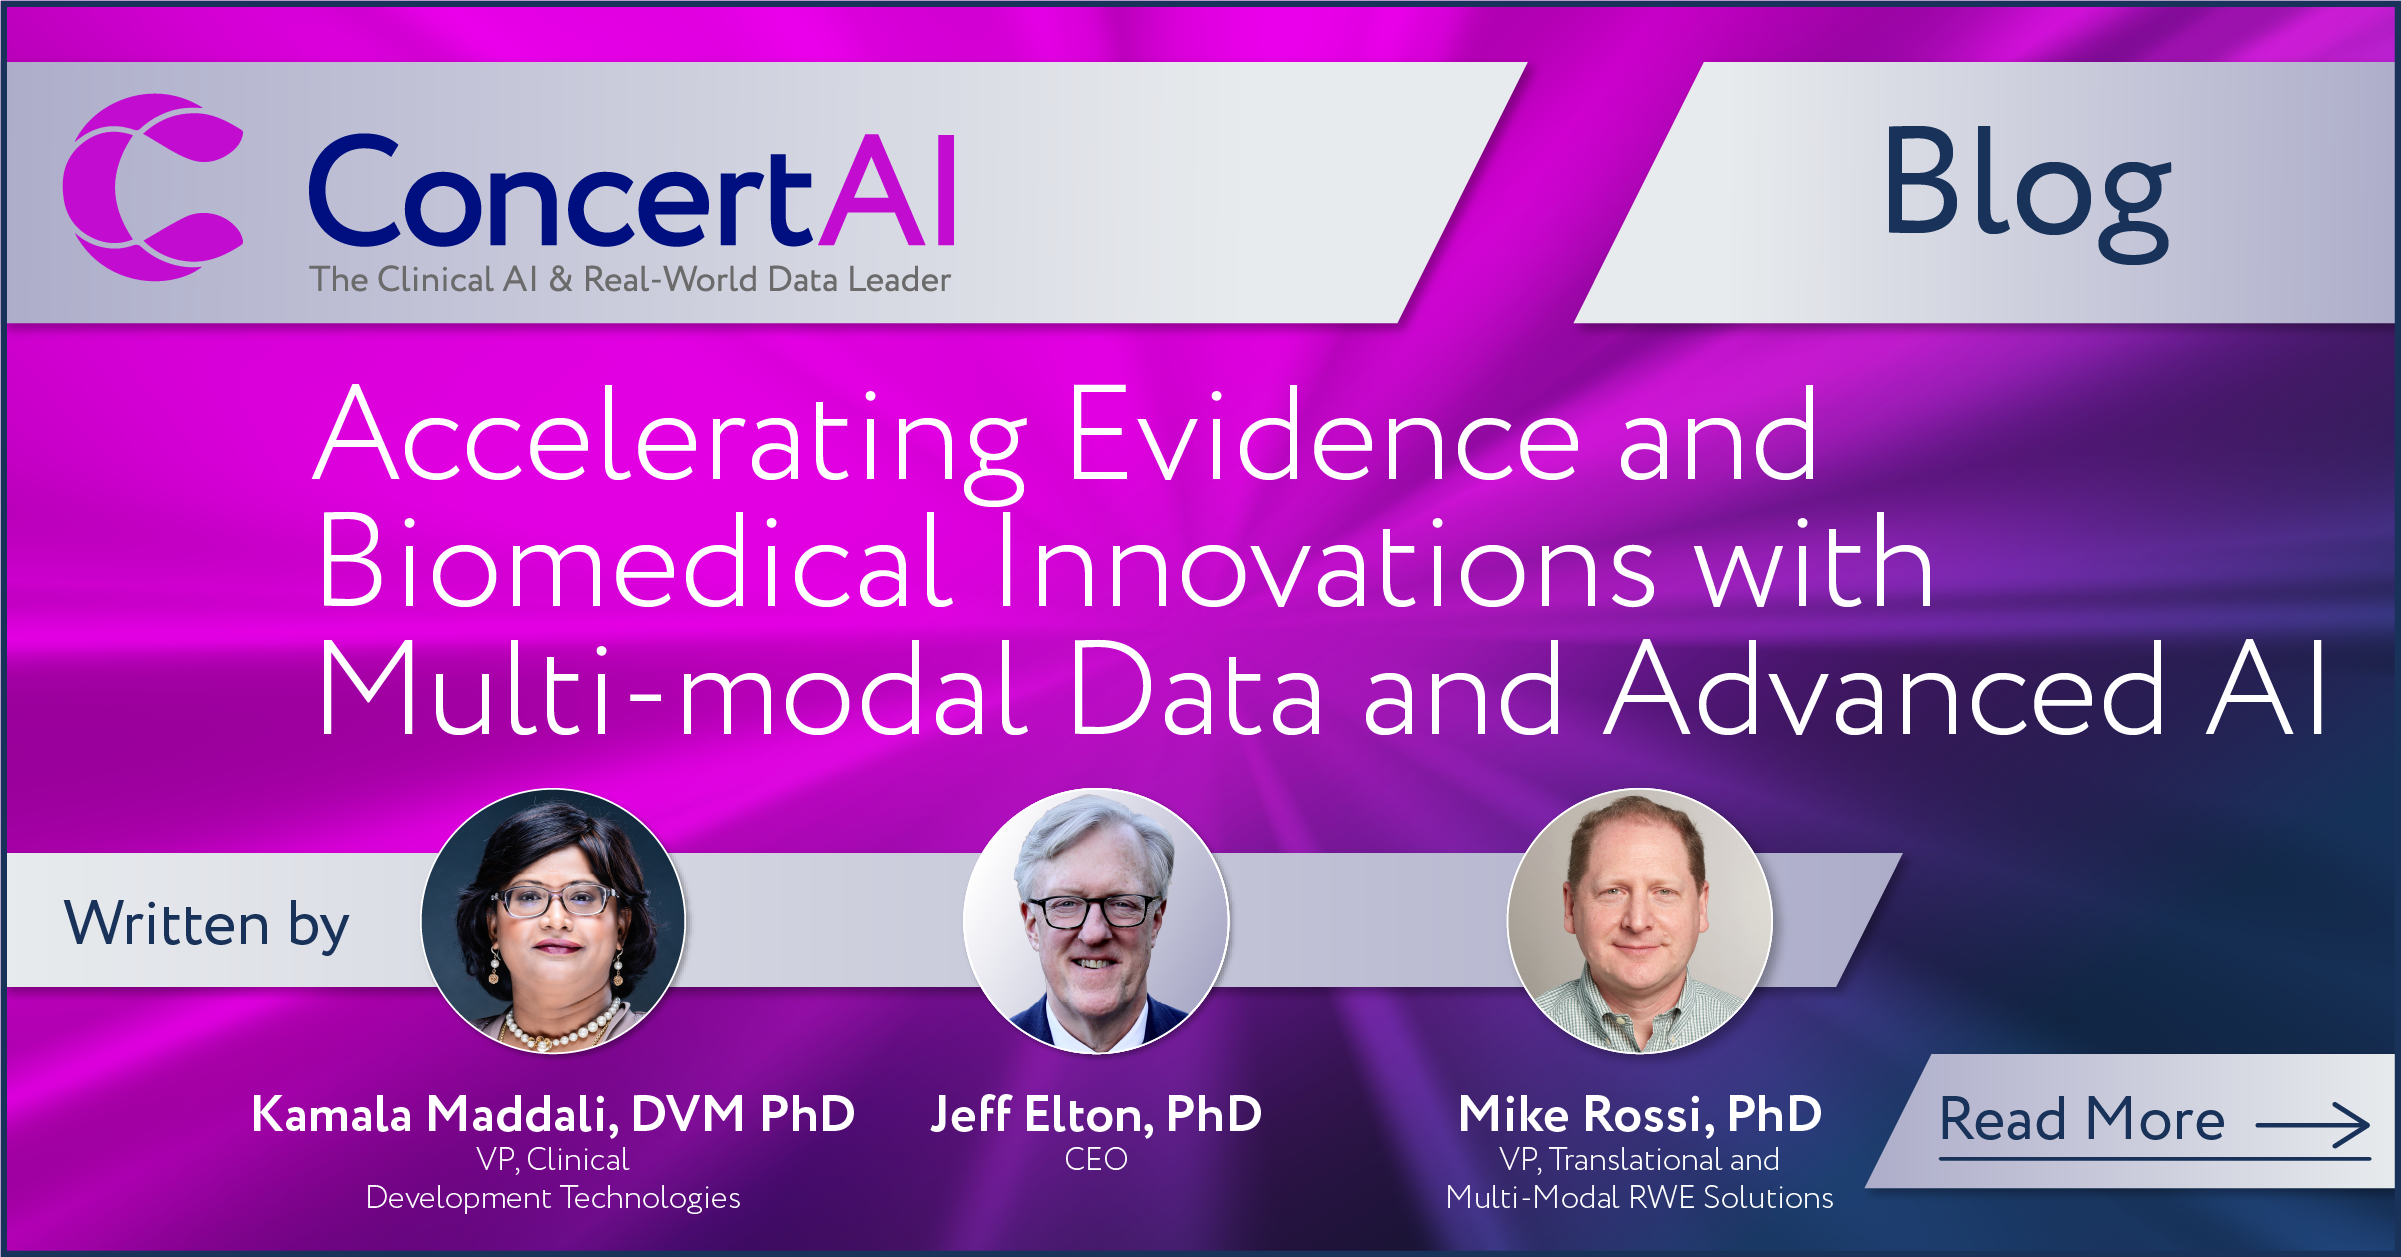 Accelerating Evidence and Biomedical Innovations with Multi-modal Data and Advanced AI